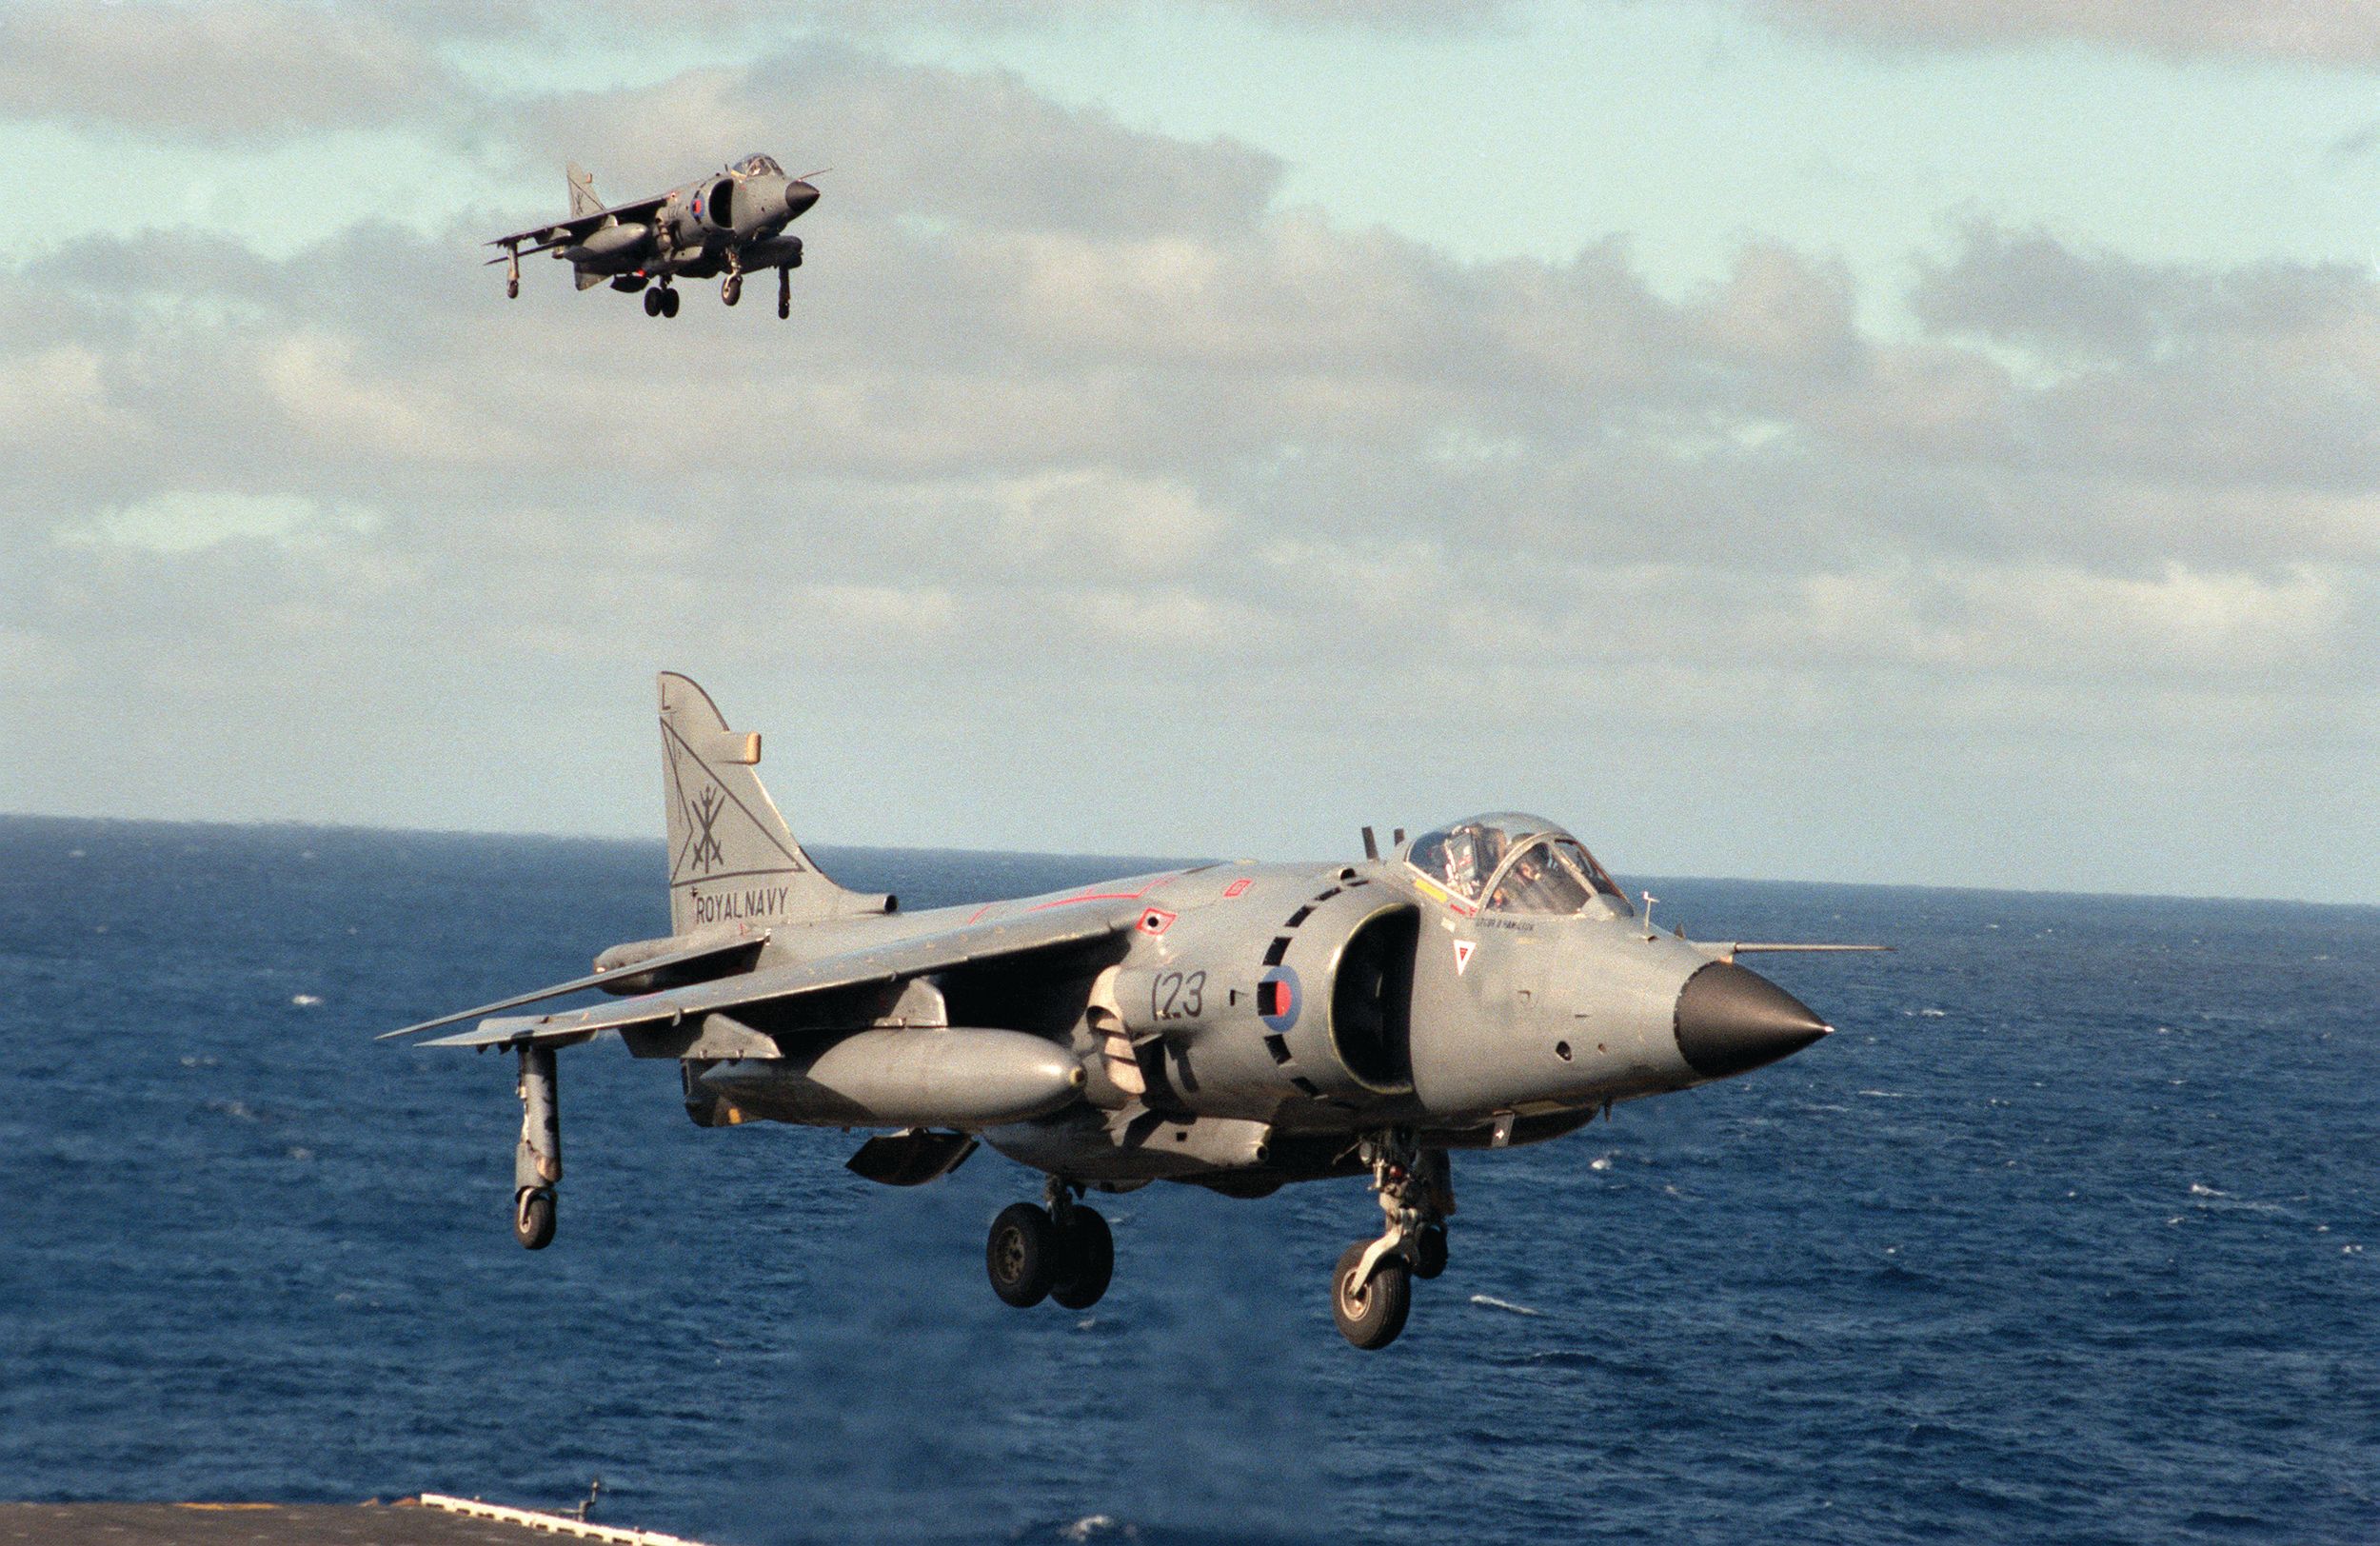 One British Royal Navy FRS.Mk 1 Sea Harrier hovers over the flight deck of the aircraft carrier USS Dwight D. Eisenhower as another approaches during an exercise in October 1984. 